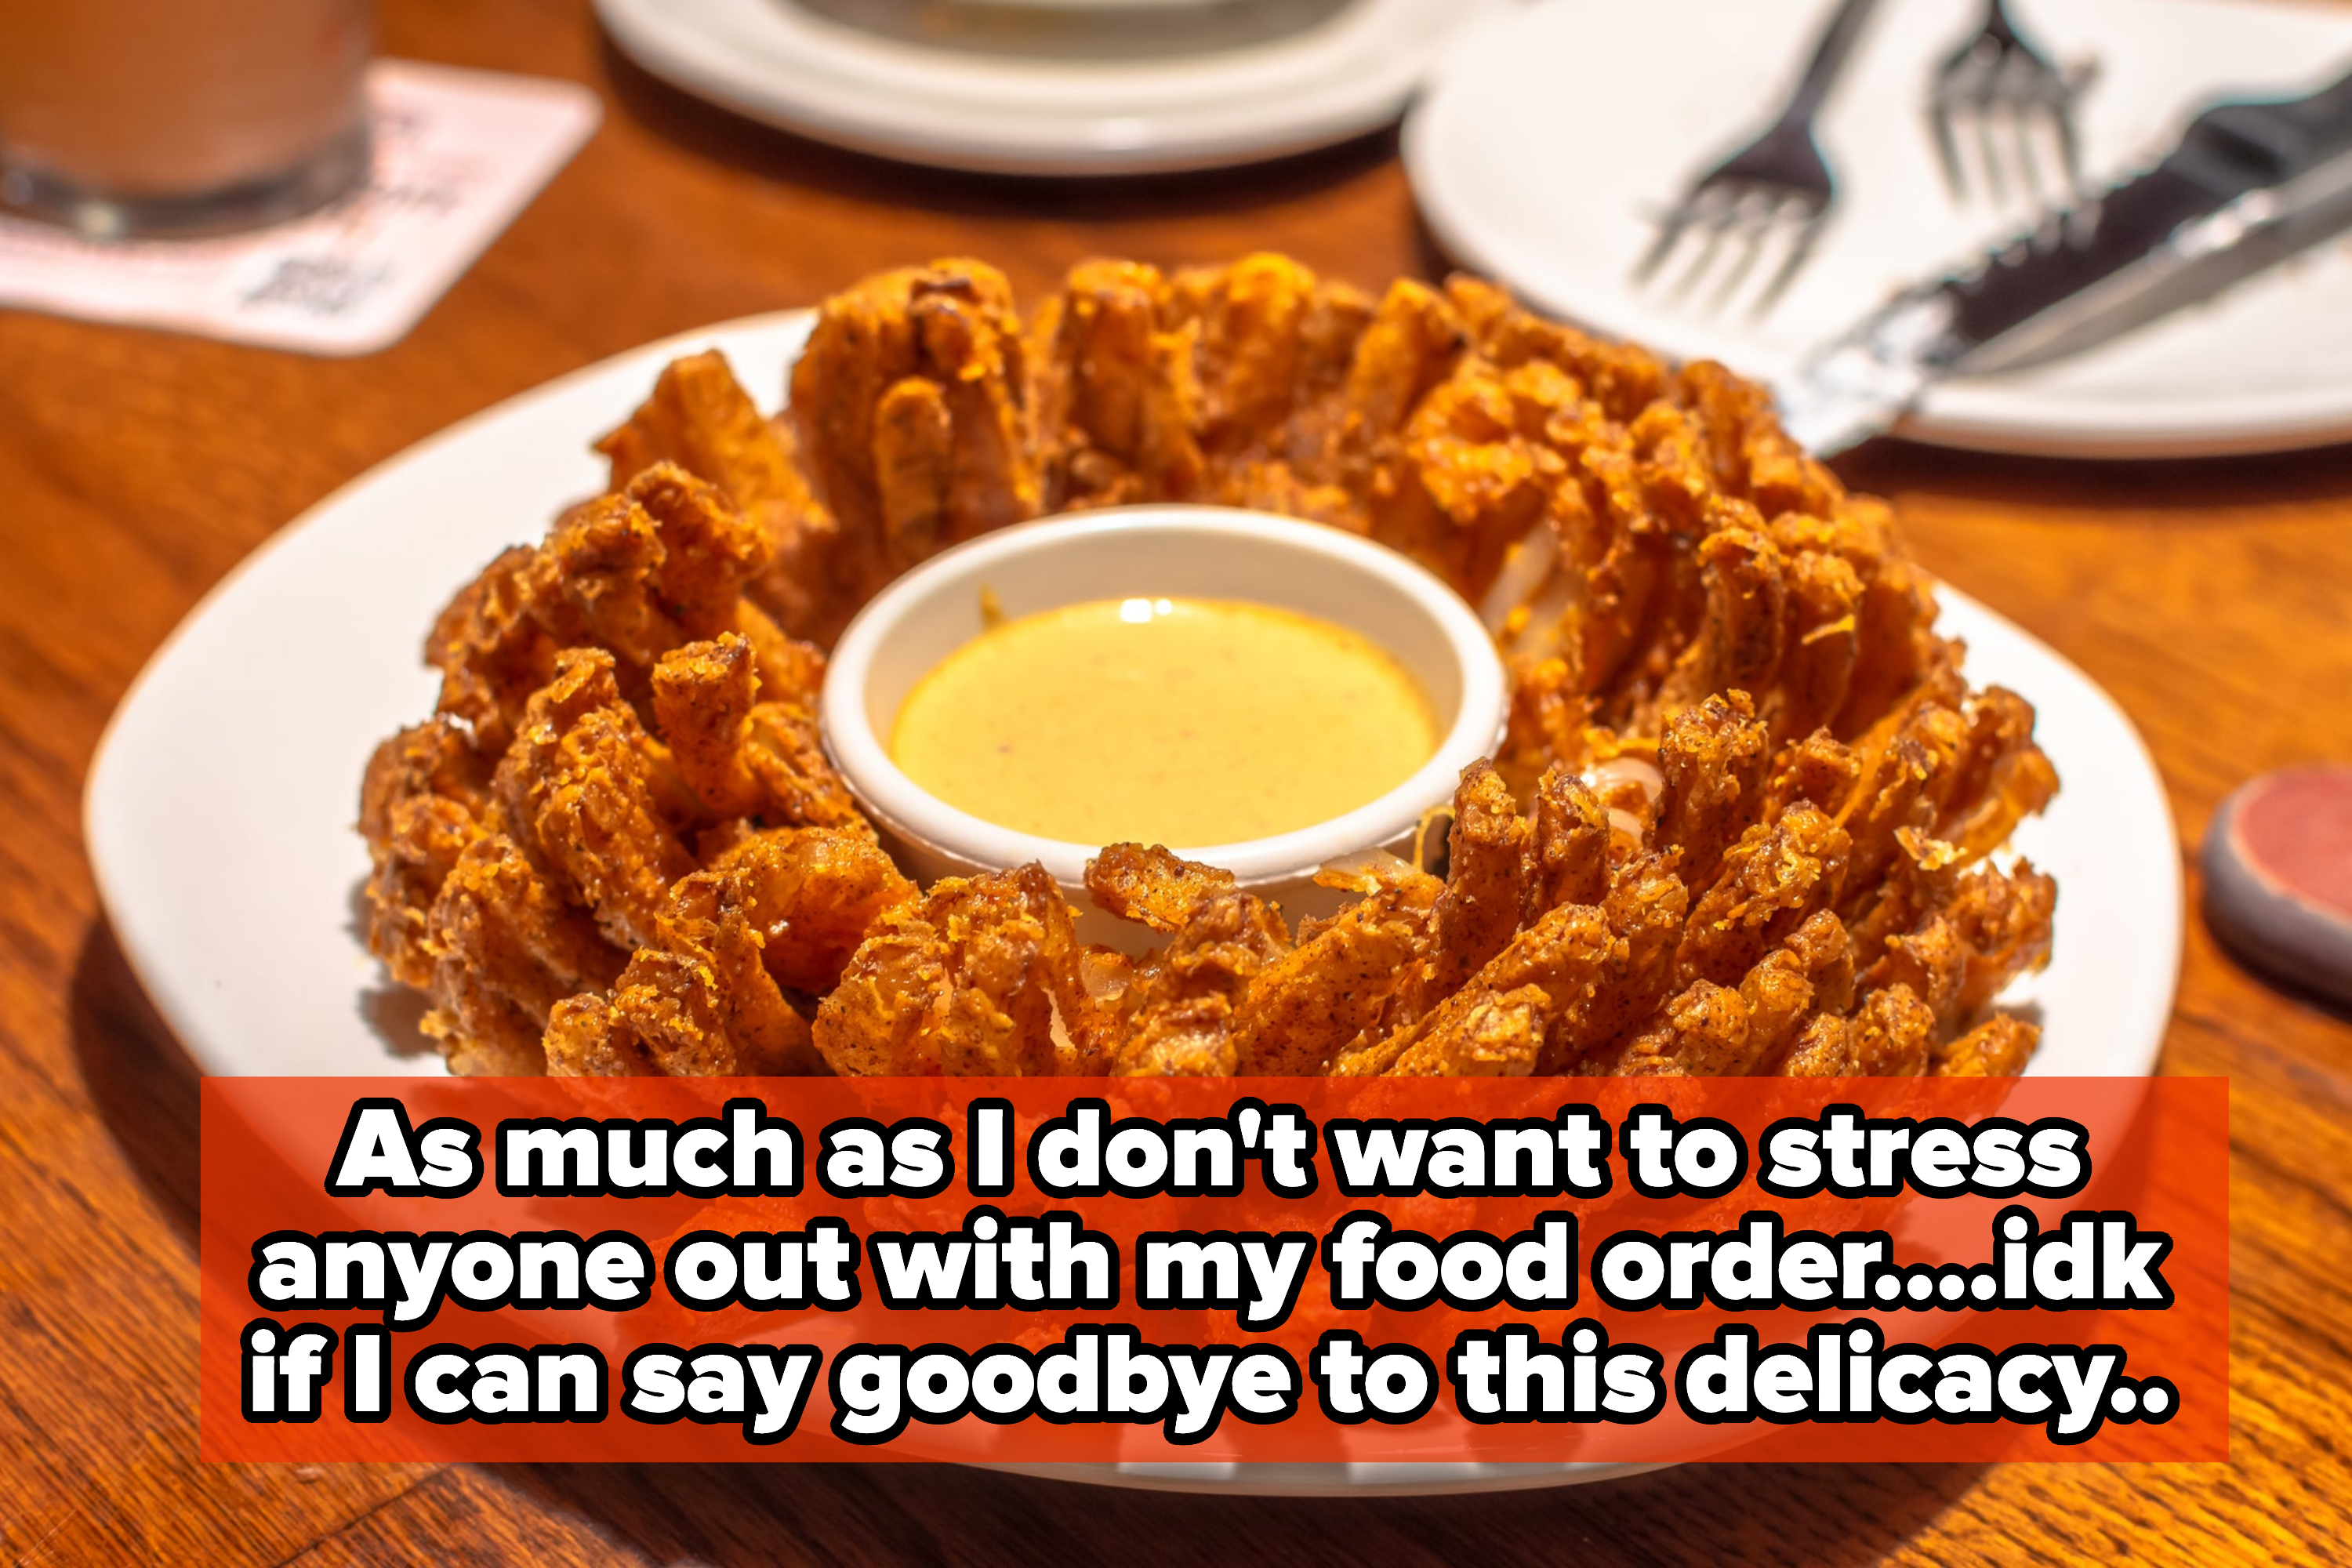 A blooming onion dish